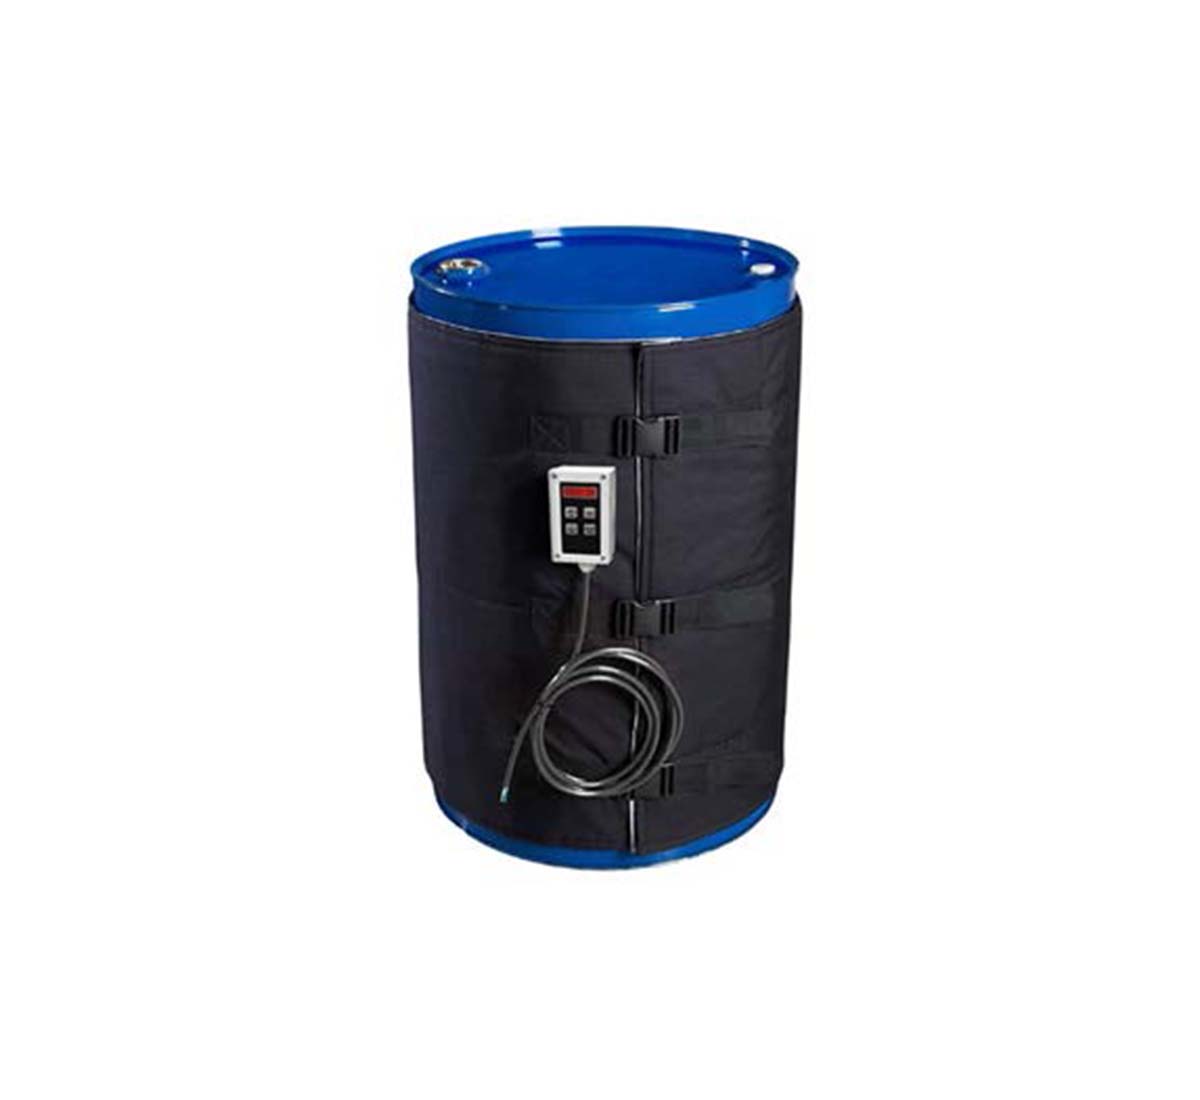 A picture of a drum heater with temperature of 0-90°C with casing of teflon coated polyester